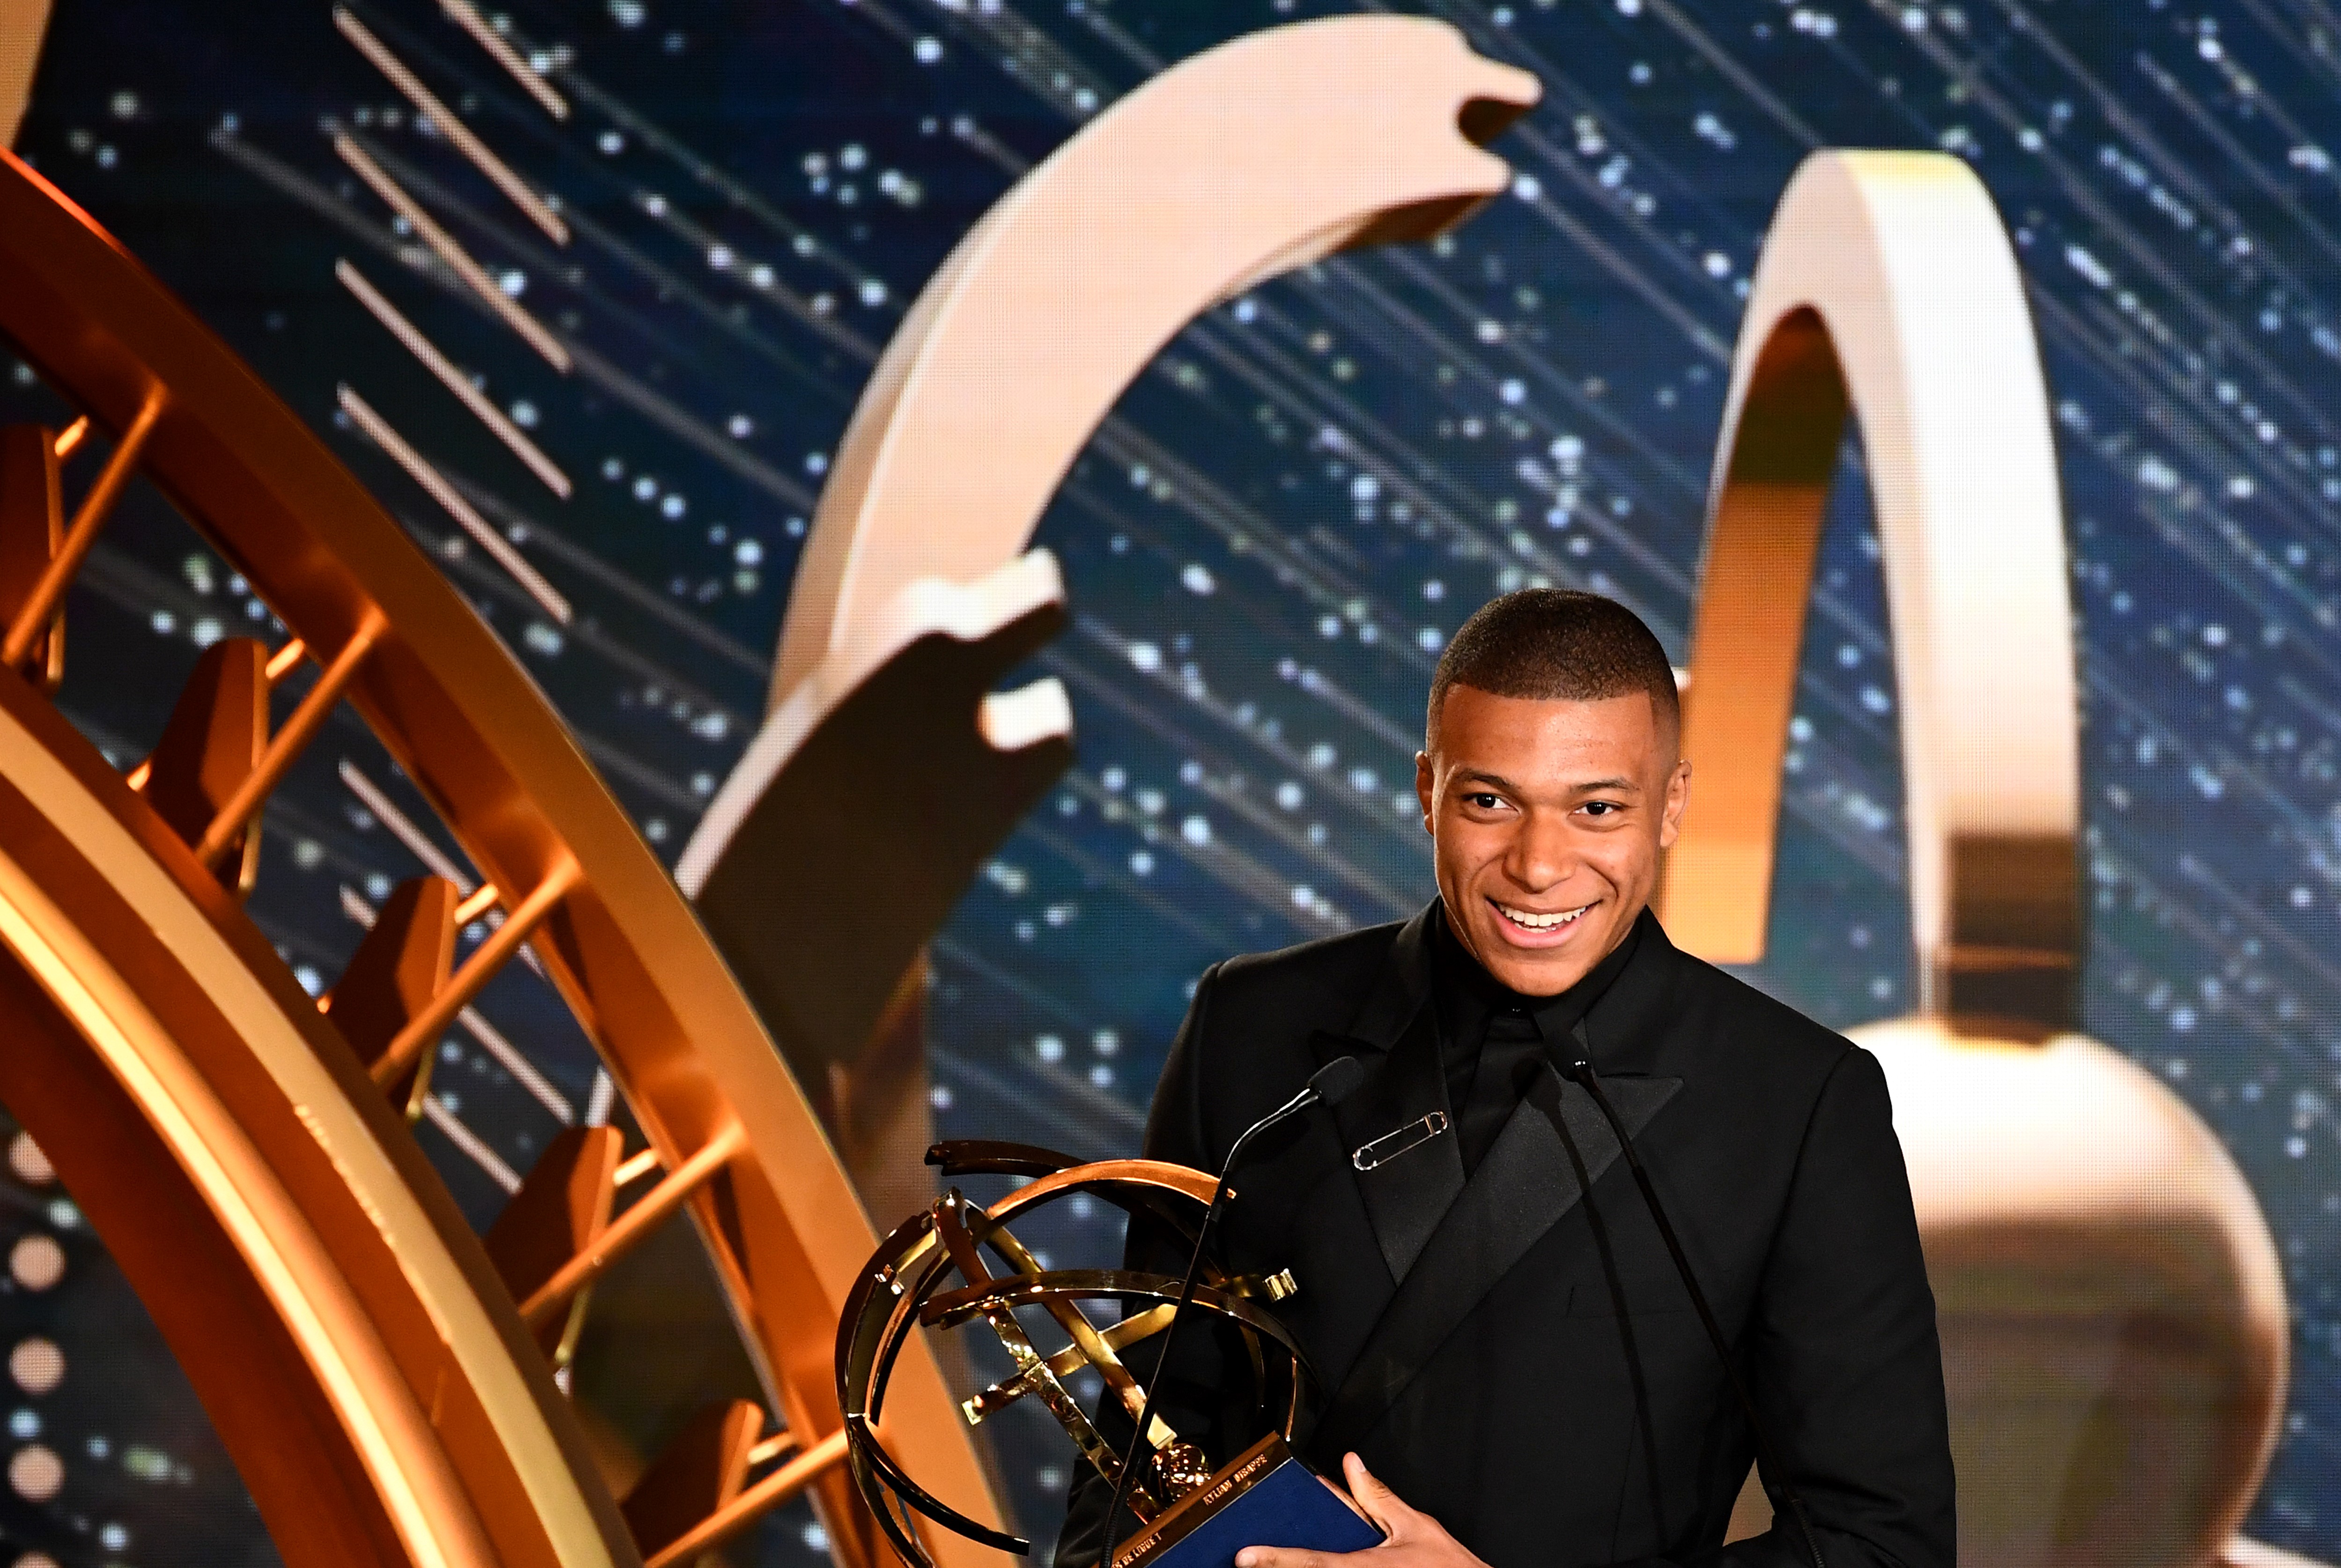 TOPSHOT - Paris Saint-Germain's French forward Kylian MBappe reacts after receiving the Best Ligue 1 player award , on May 19, 2019 in Paris, during the 28th edition of the UNFP (French National Professional Football players Union) trophy ceremony. (Photo by FRANCK FIFE / AFP)        (Photo credit should read FRANCK FIFE/AFP/Getty Images)